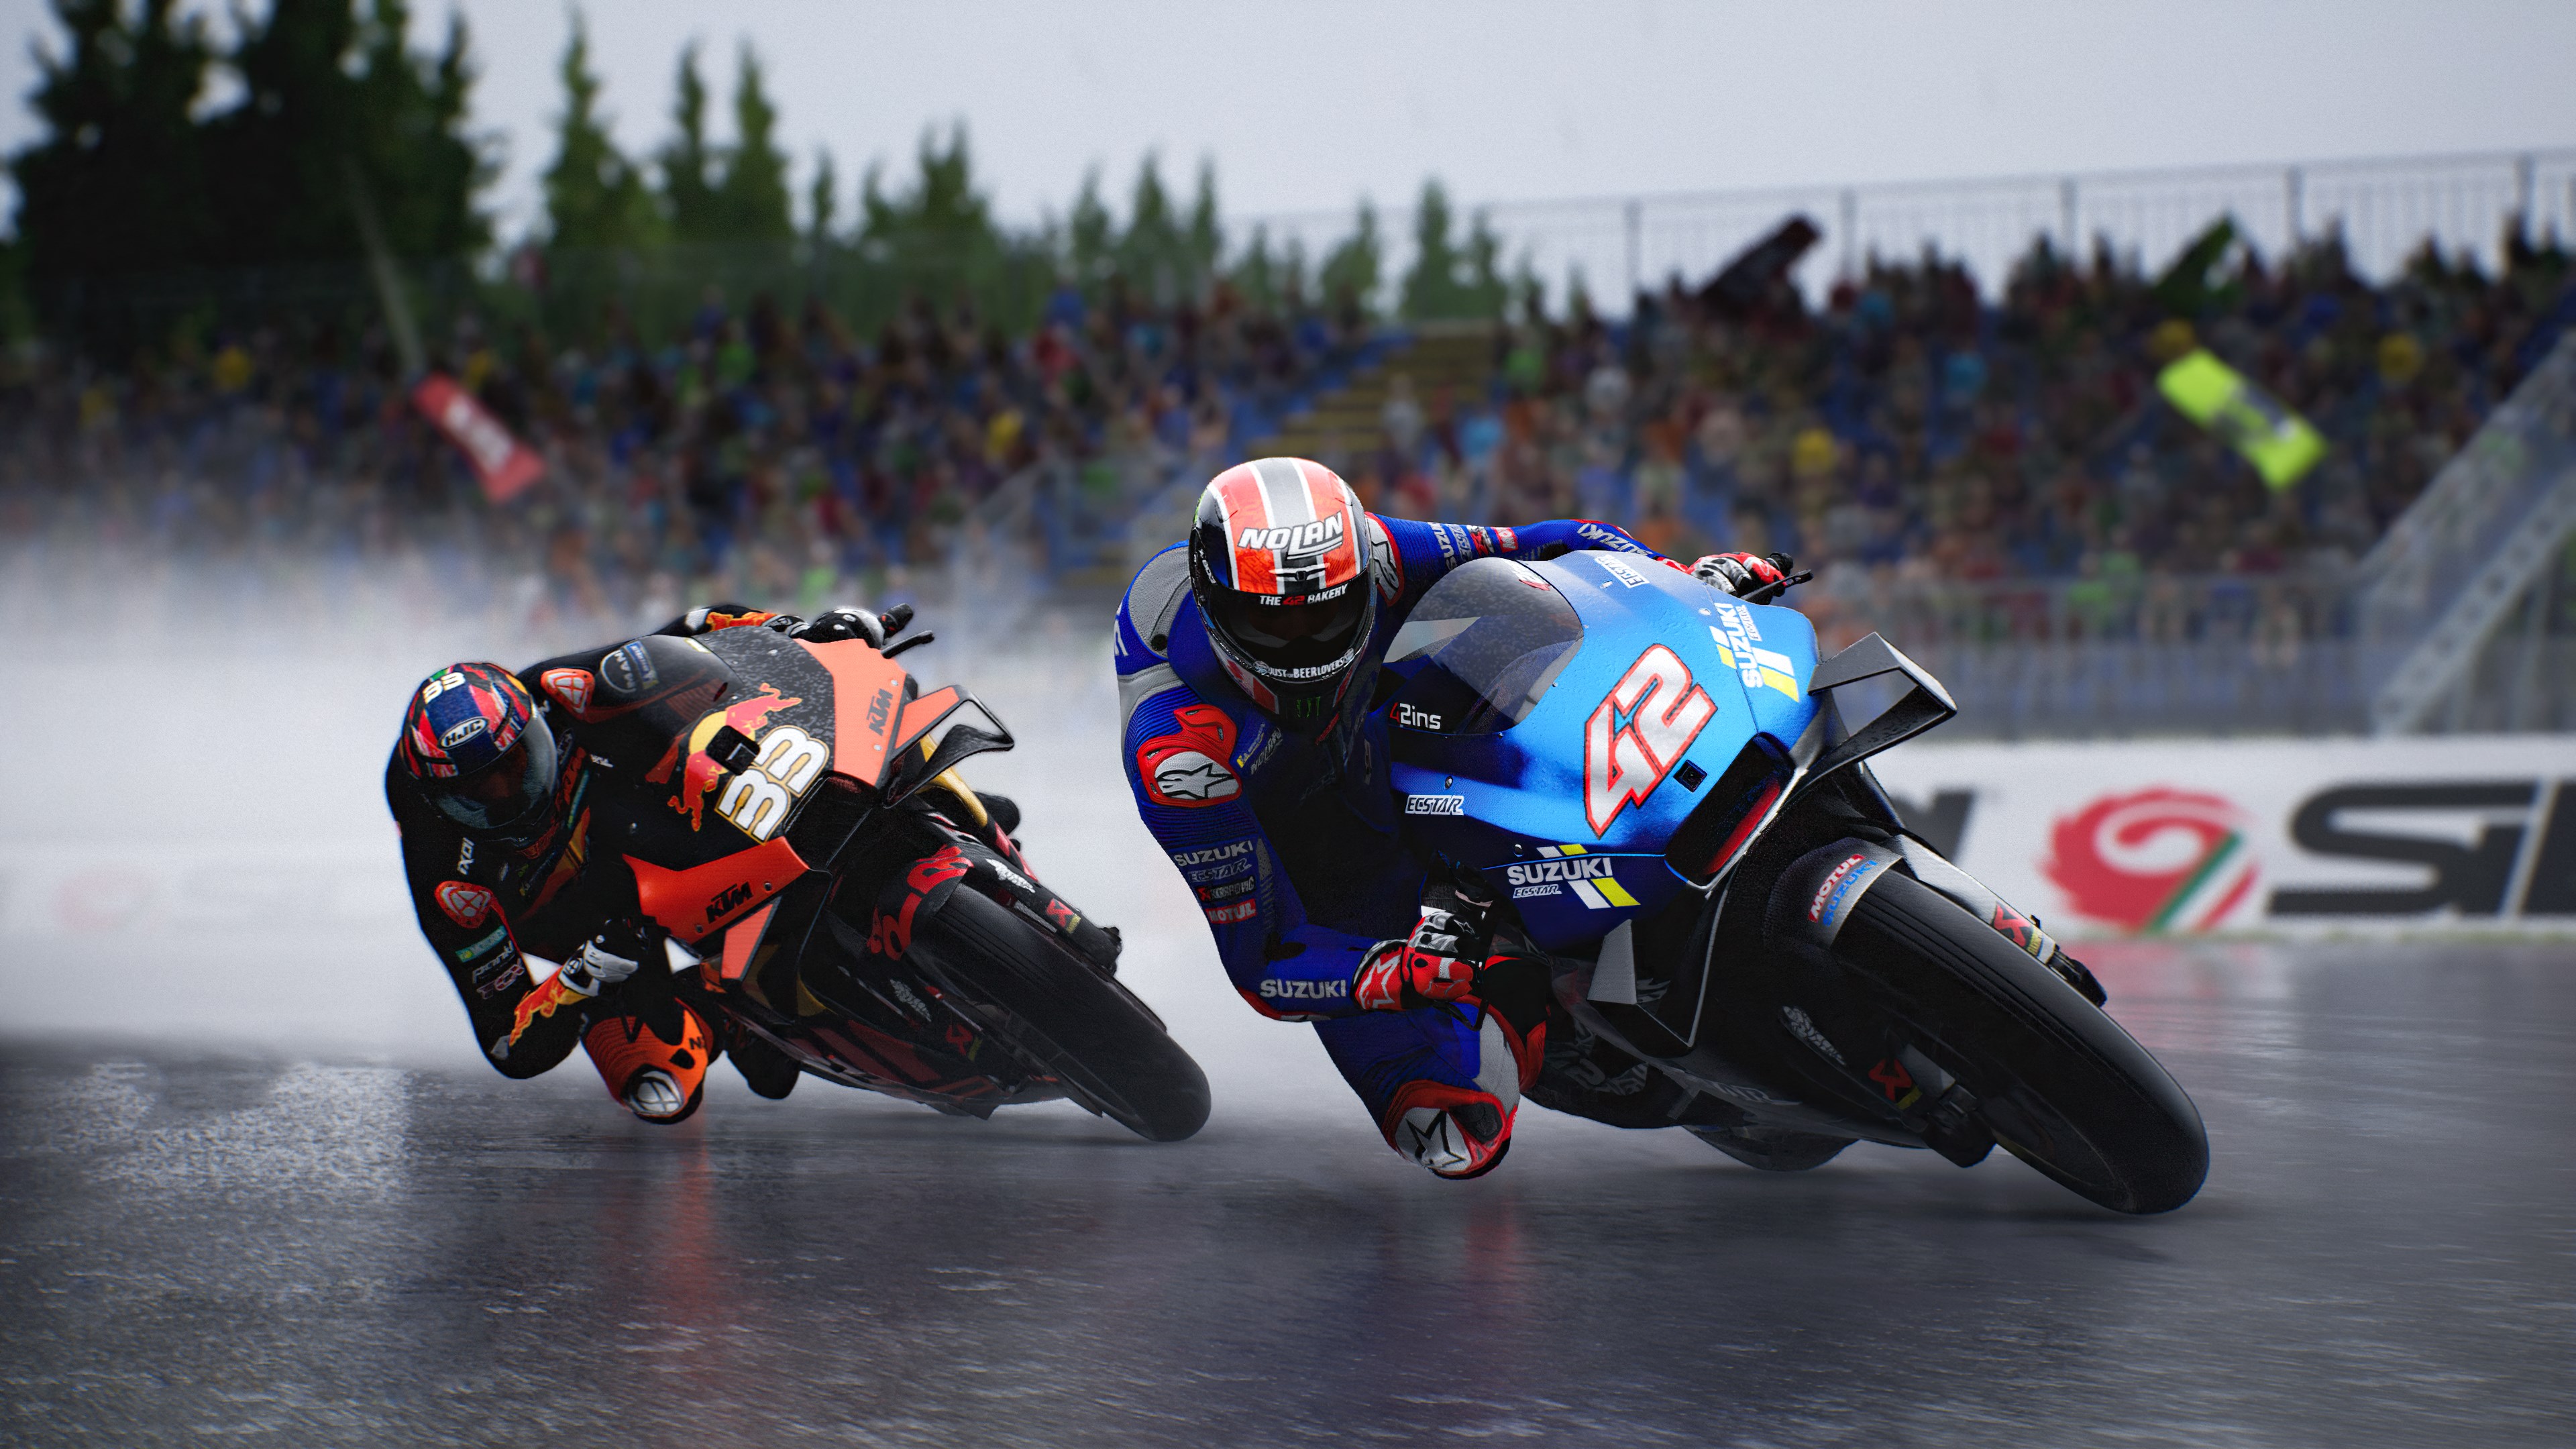 MotoGP 21 Is Now Available For Xbox One And Xbox Series X|S - Xbox